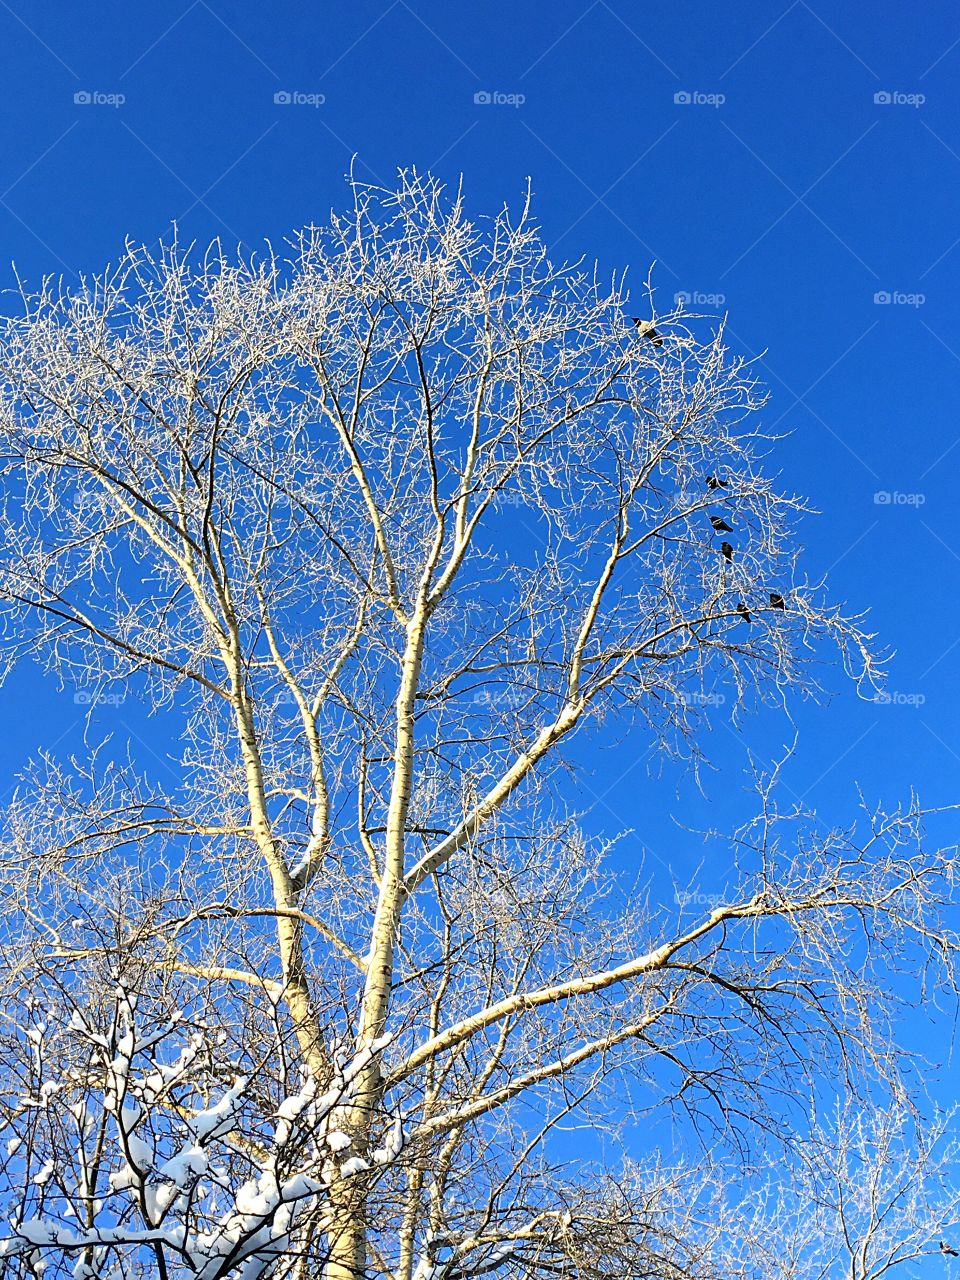 big tree against the blue sky in winter